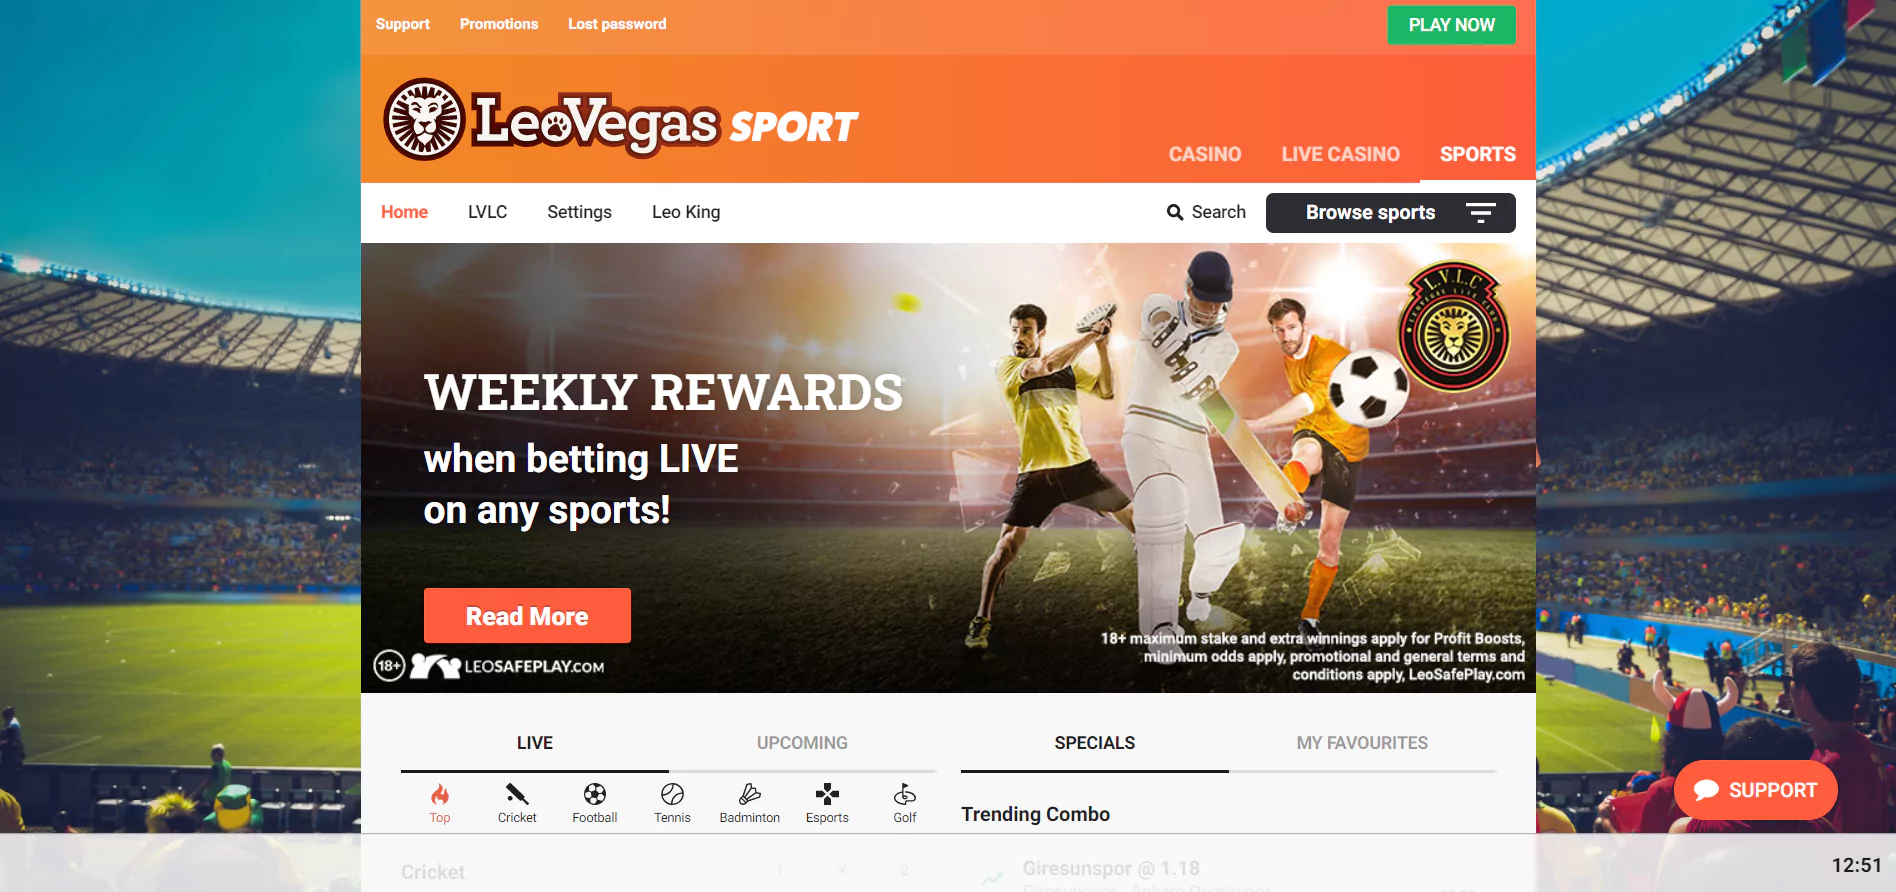 Leovegas Online Casino Sports Betting Home Page